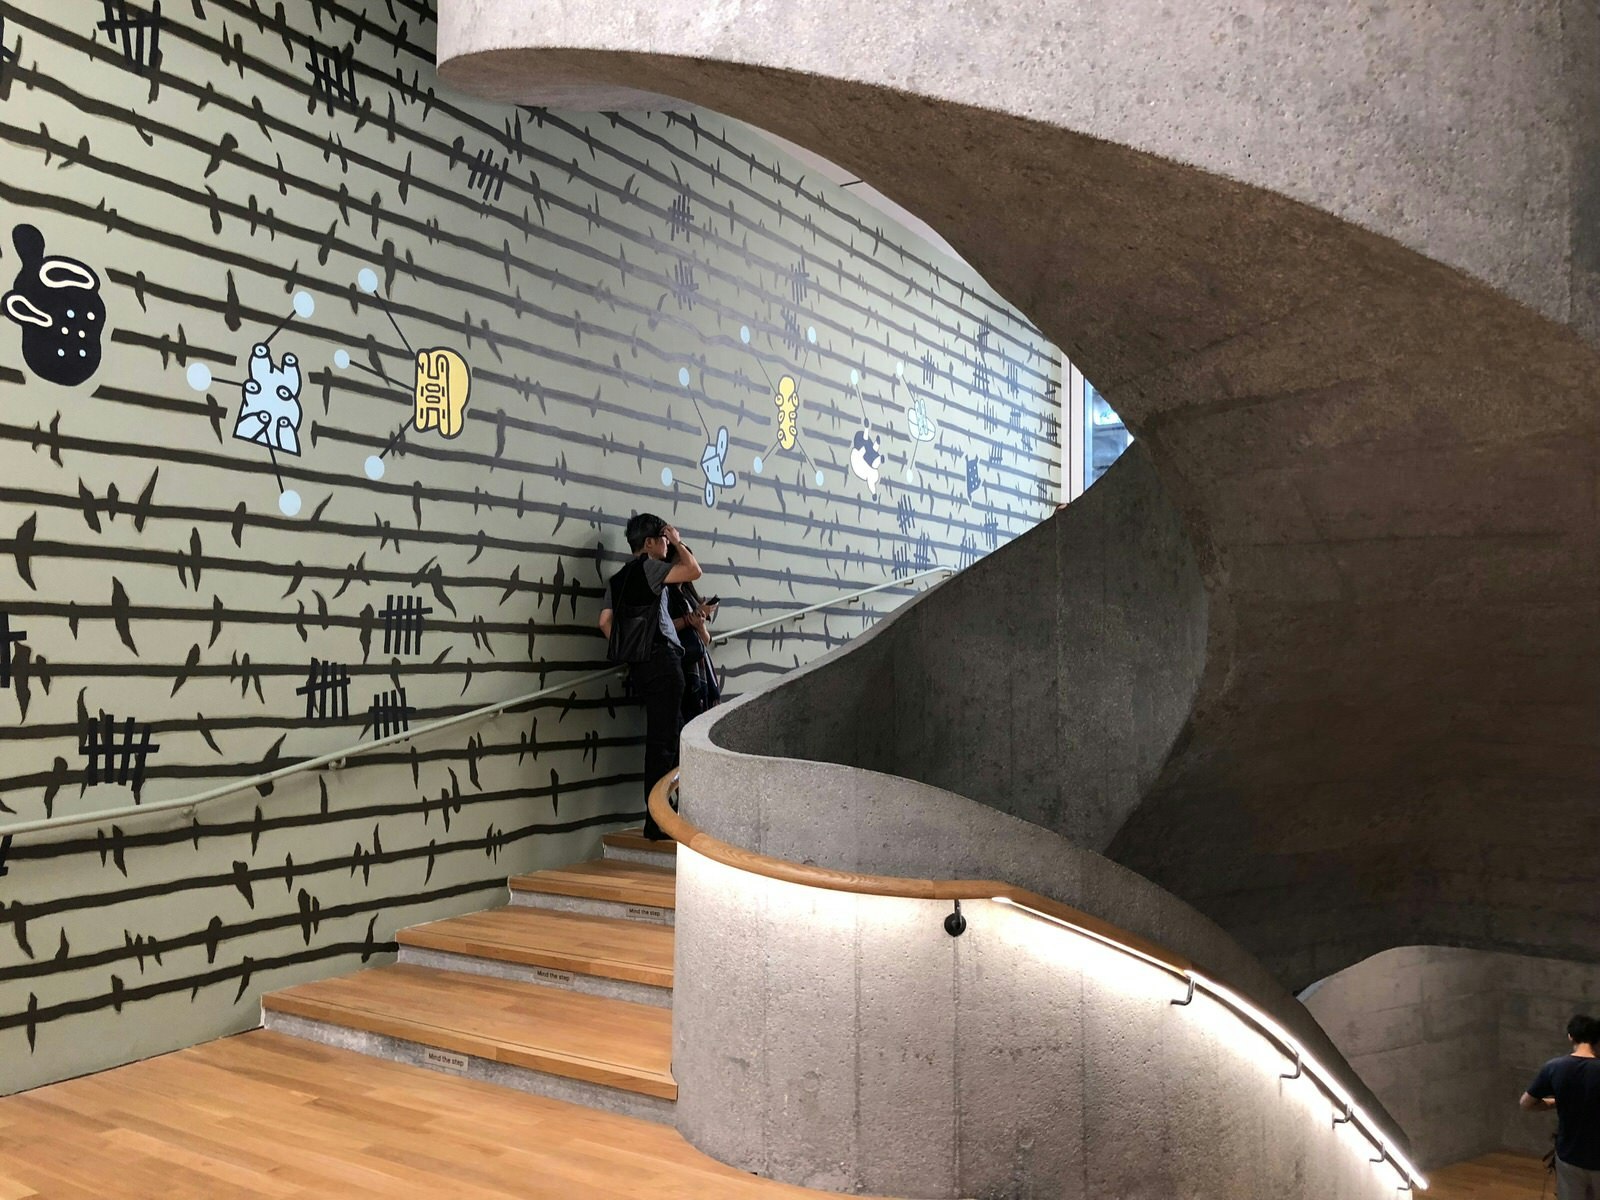 Contemporary art gallery with brutalist spiral staircase and mural painting on the wall